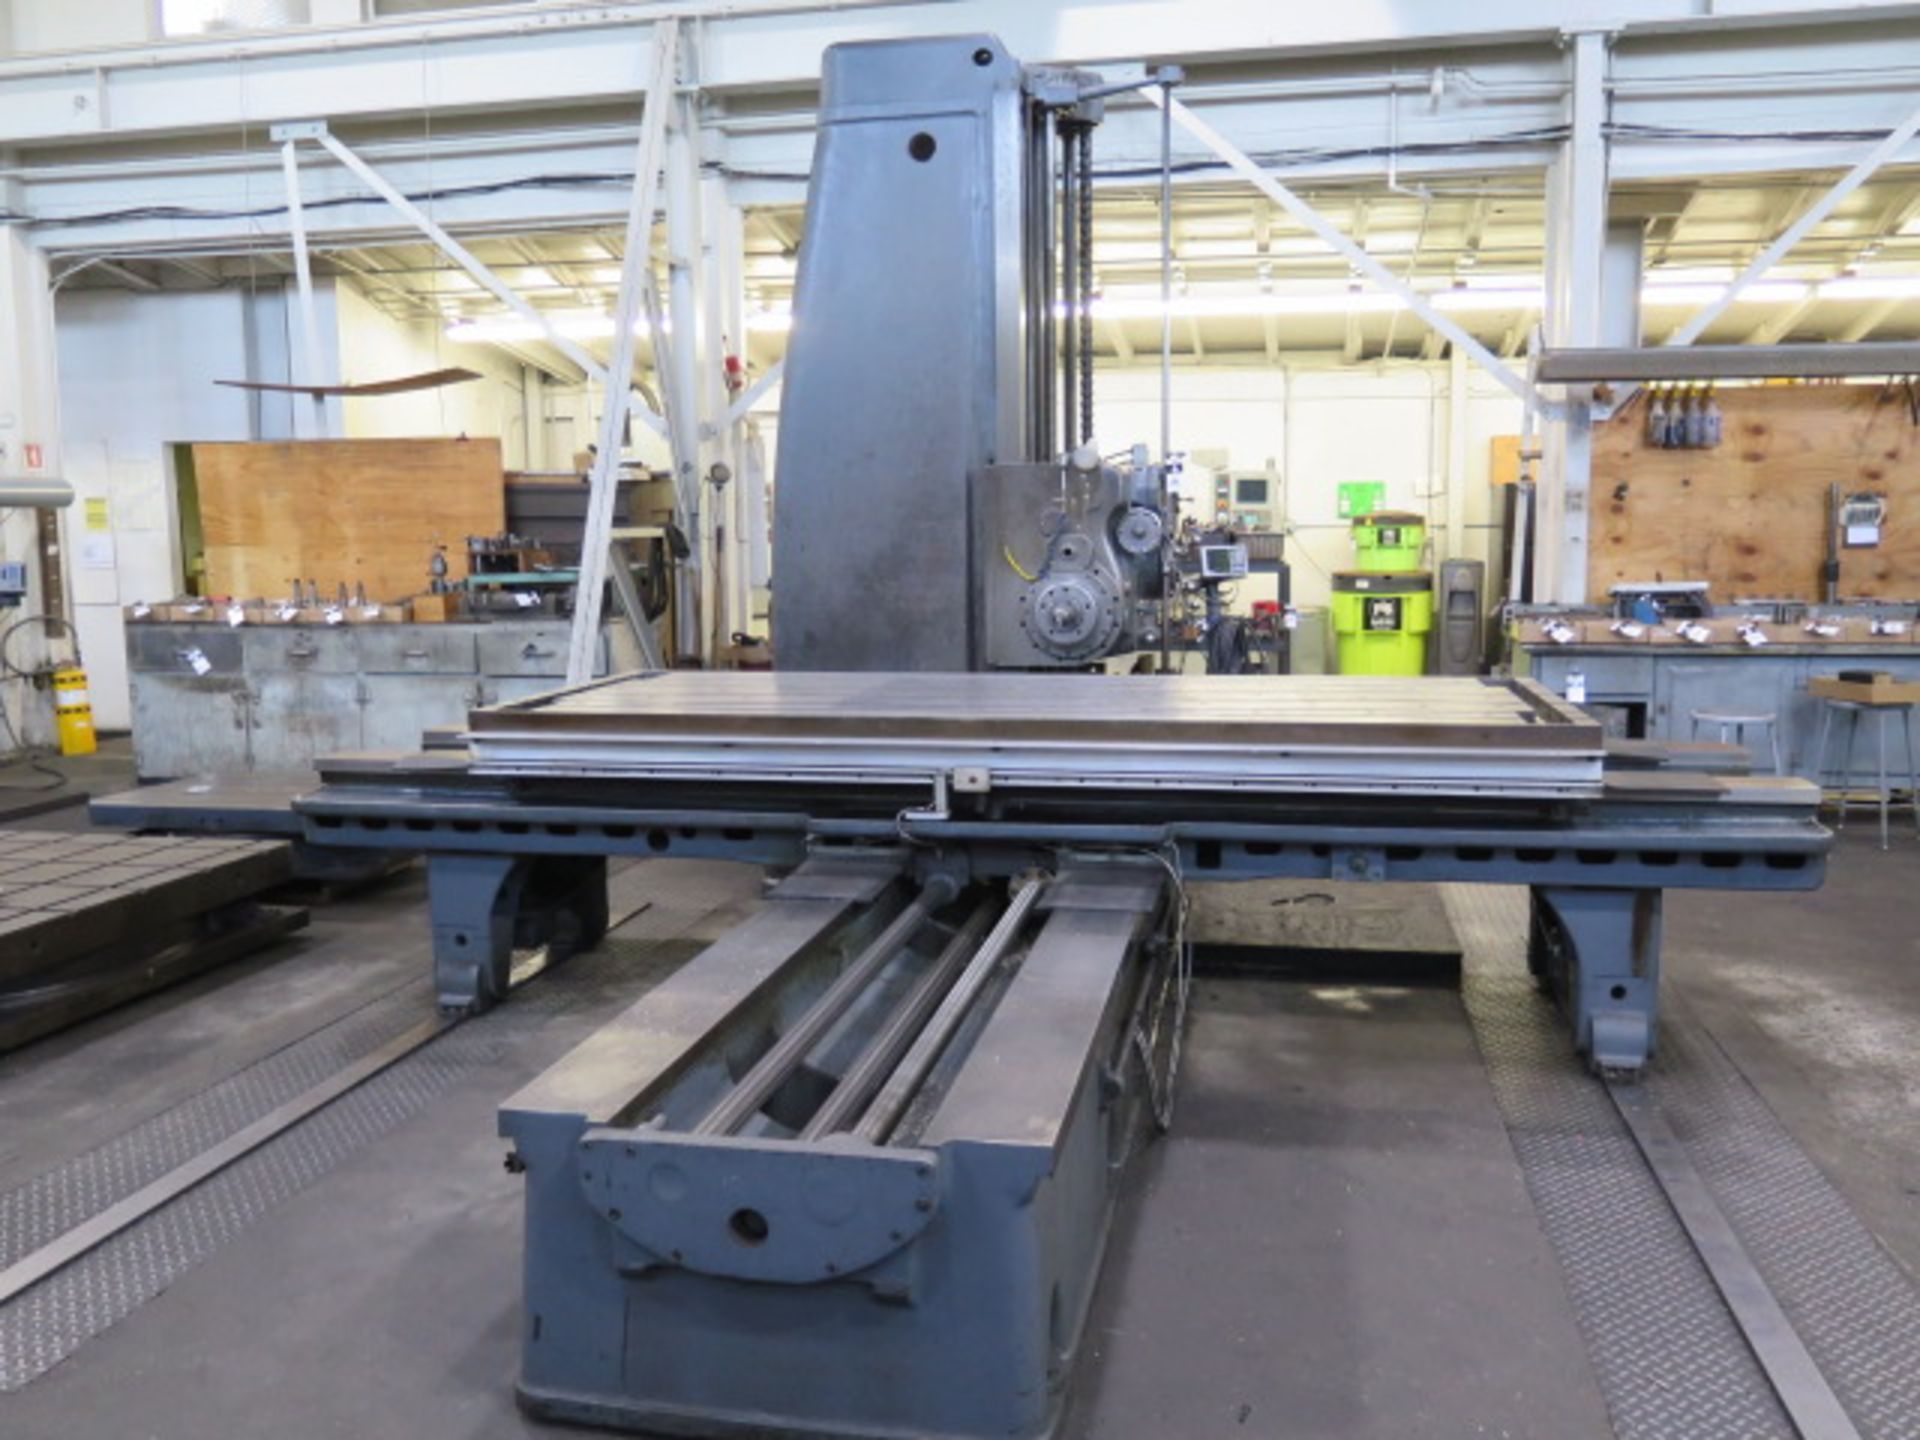 Giddings & Lewis 350-T Horizontal Boring Mill s/n 5182 w/ Fagor Innova 3-Axis DRO, SOLD AS IS - Image 2 of 11